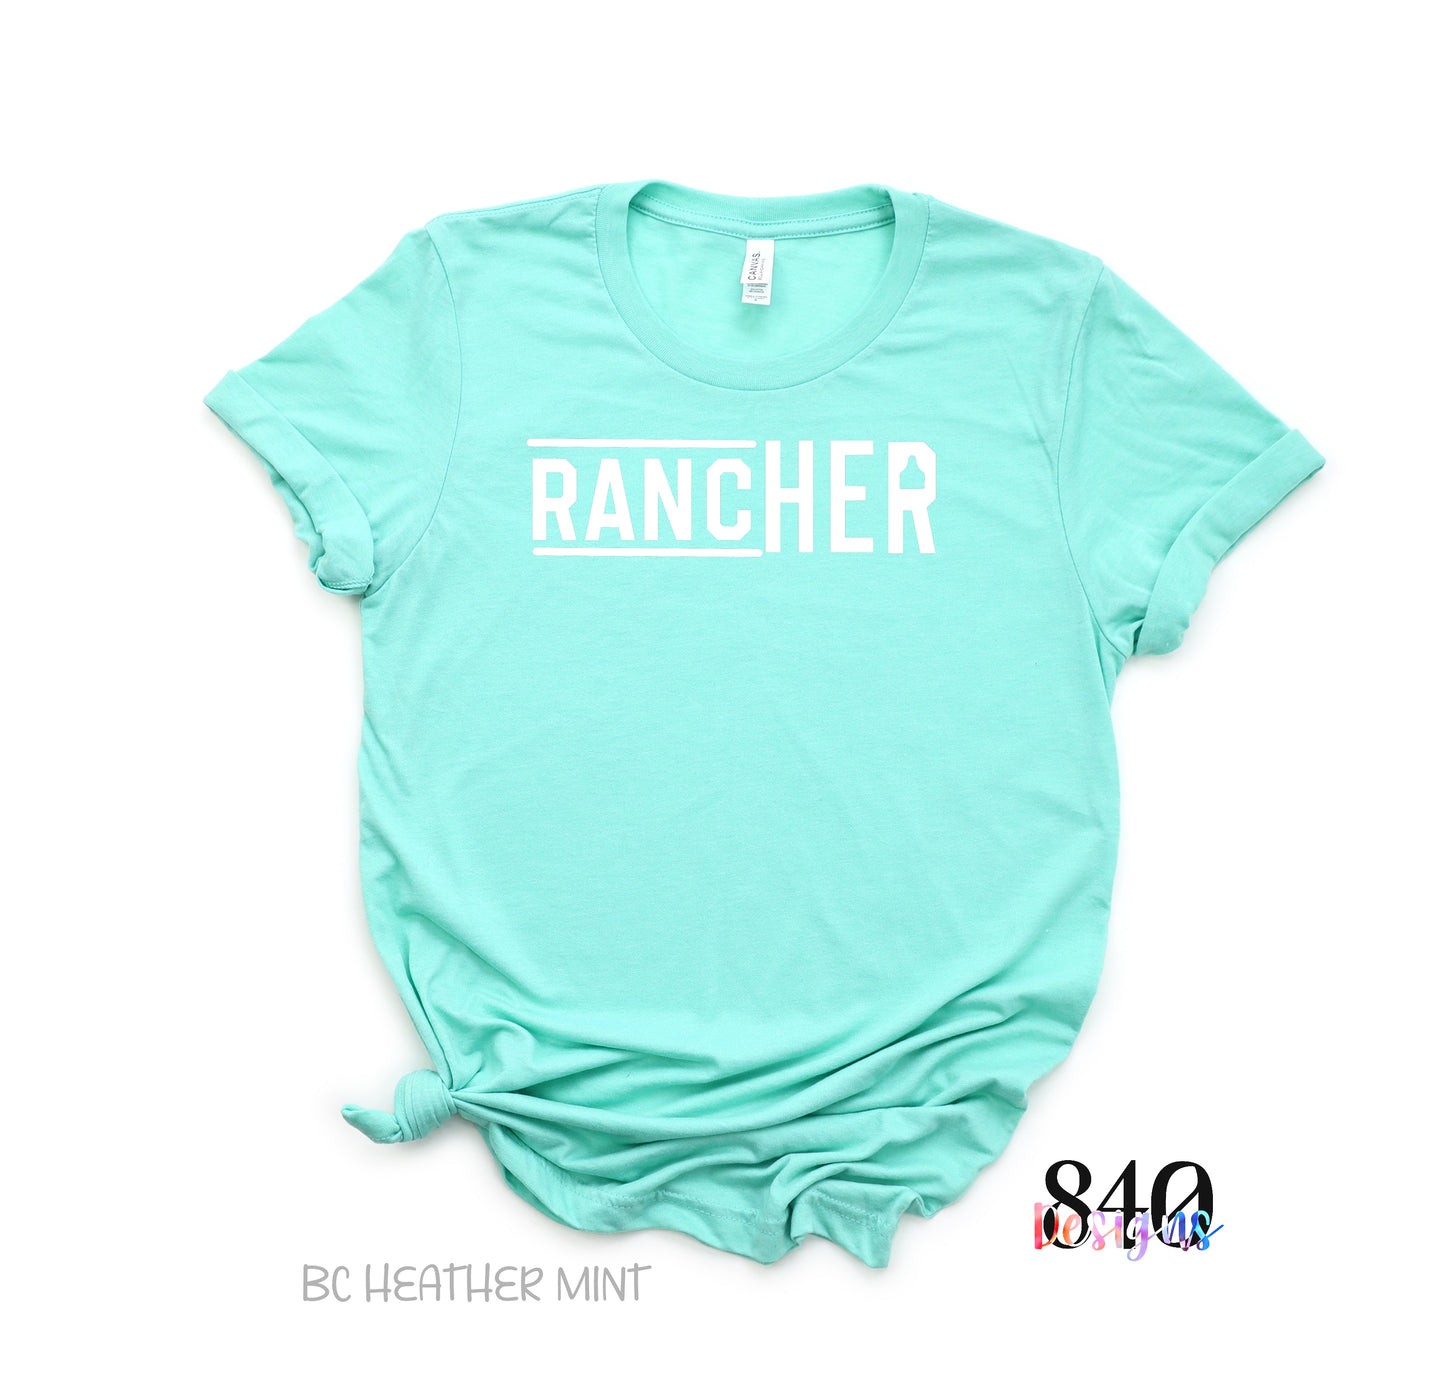 RancHer - 840 Exclusive White Ink